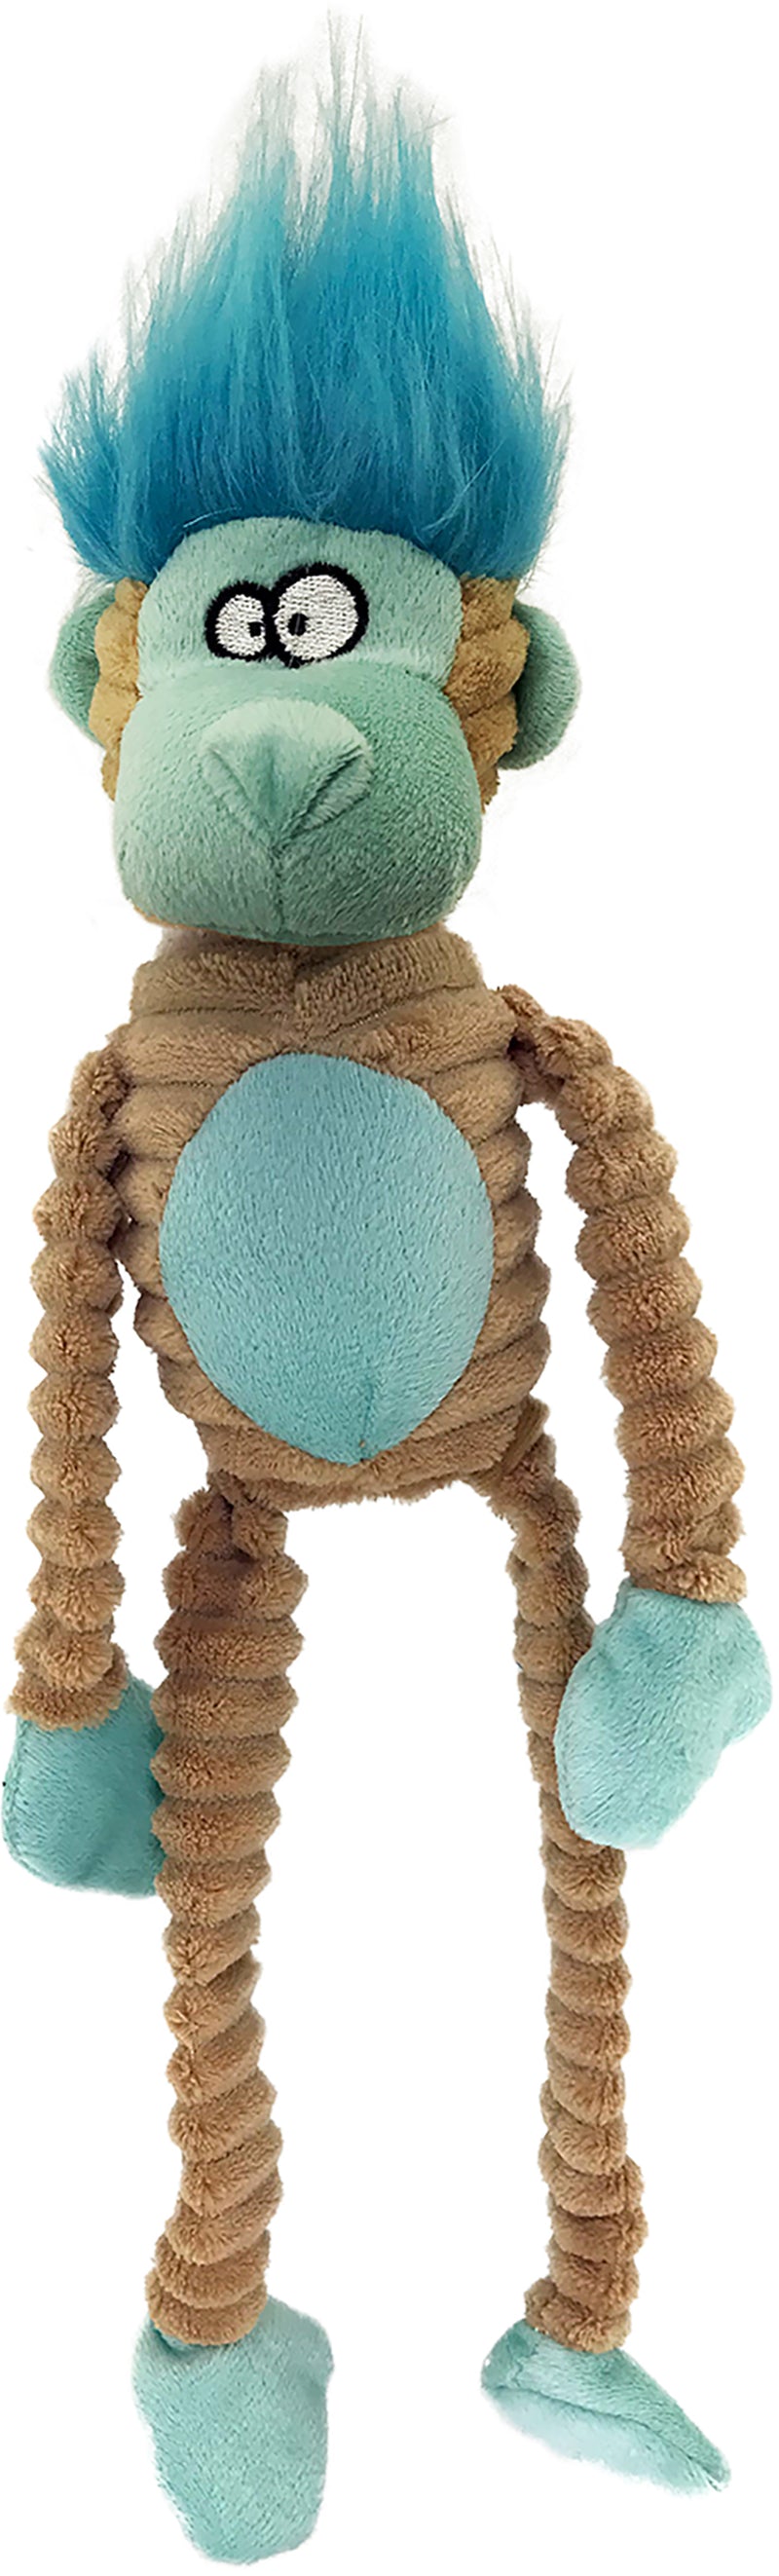 Tuff Squeaks Jungle Monkey Double Stitched